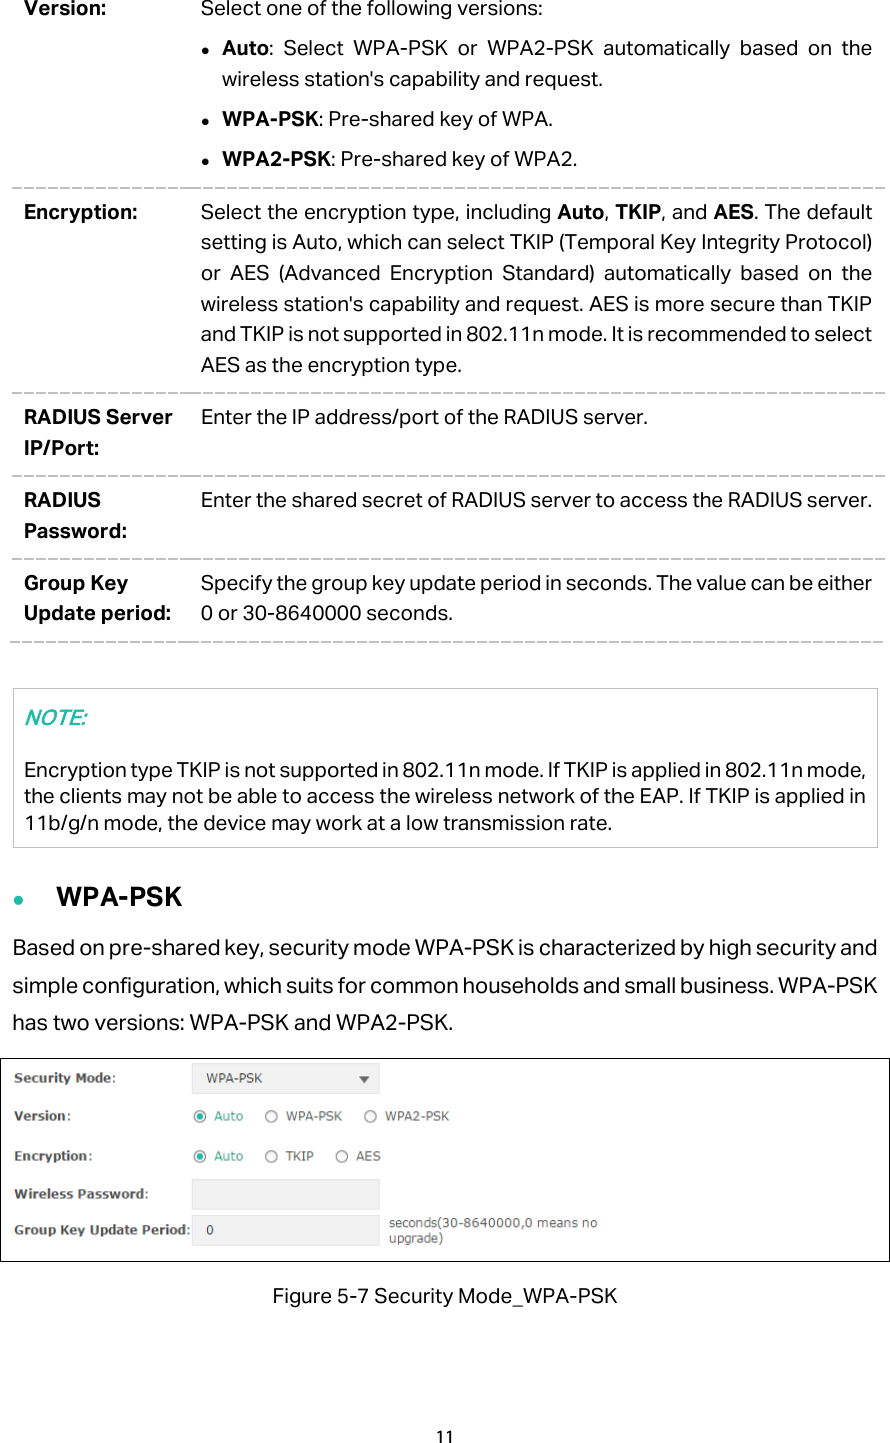 Version:  Select one of the following versions:    Auto:  Select WPA-PSK or WPA2-PSK automatically based on the wireless station&apos;s capability and request.  WPA-PSK: Pre-shared key of WPA.  WPA2-PSK: Pre-shared key of WPA2. Encryption:  Select the encryption type, including Auto, TKIP, and AES. The default setting is Auto, which can select TKIP (Temporal Key Integrity Protocol) or AES (Advanced Encryption Standard) automatically based on the wireless station&apos;s capability and request. AES is more secure than TKIP and TKIP is not supported in 802.11n mode. It is recommended to select AES as the encryption type. RADIUS Server IP/Port: Enter the IP address/port of the RADIUS server. RADIUS Password: Enter the shared secret of RADIUS server to access the RADIUS server. Group Key Update period: Specify the group key update period in seconds. The value can be either 0 or 30-8640000 seconds.  NOTE: Encryption type TKIP is not supported in 802.11n mode. If TKIP is applied in 802.11n mode, the clients may not be able to access the wireless network of the EAP. If TKIP is applied in 11b/g/n mode, the device may work at a low transmission rate.  WPA-PSK Based on pre-shared key, security mode WPA-PSK is characterized by high security and simple configuration, which suits for common households and small business. WPA-PSK has two versions: WPA-PSK and WPA2-PSK.  Figure 5-7 Security Mode_WPA-PSK 11  